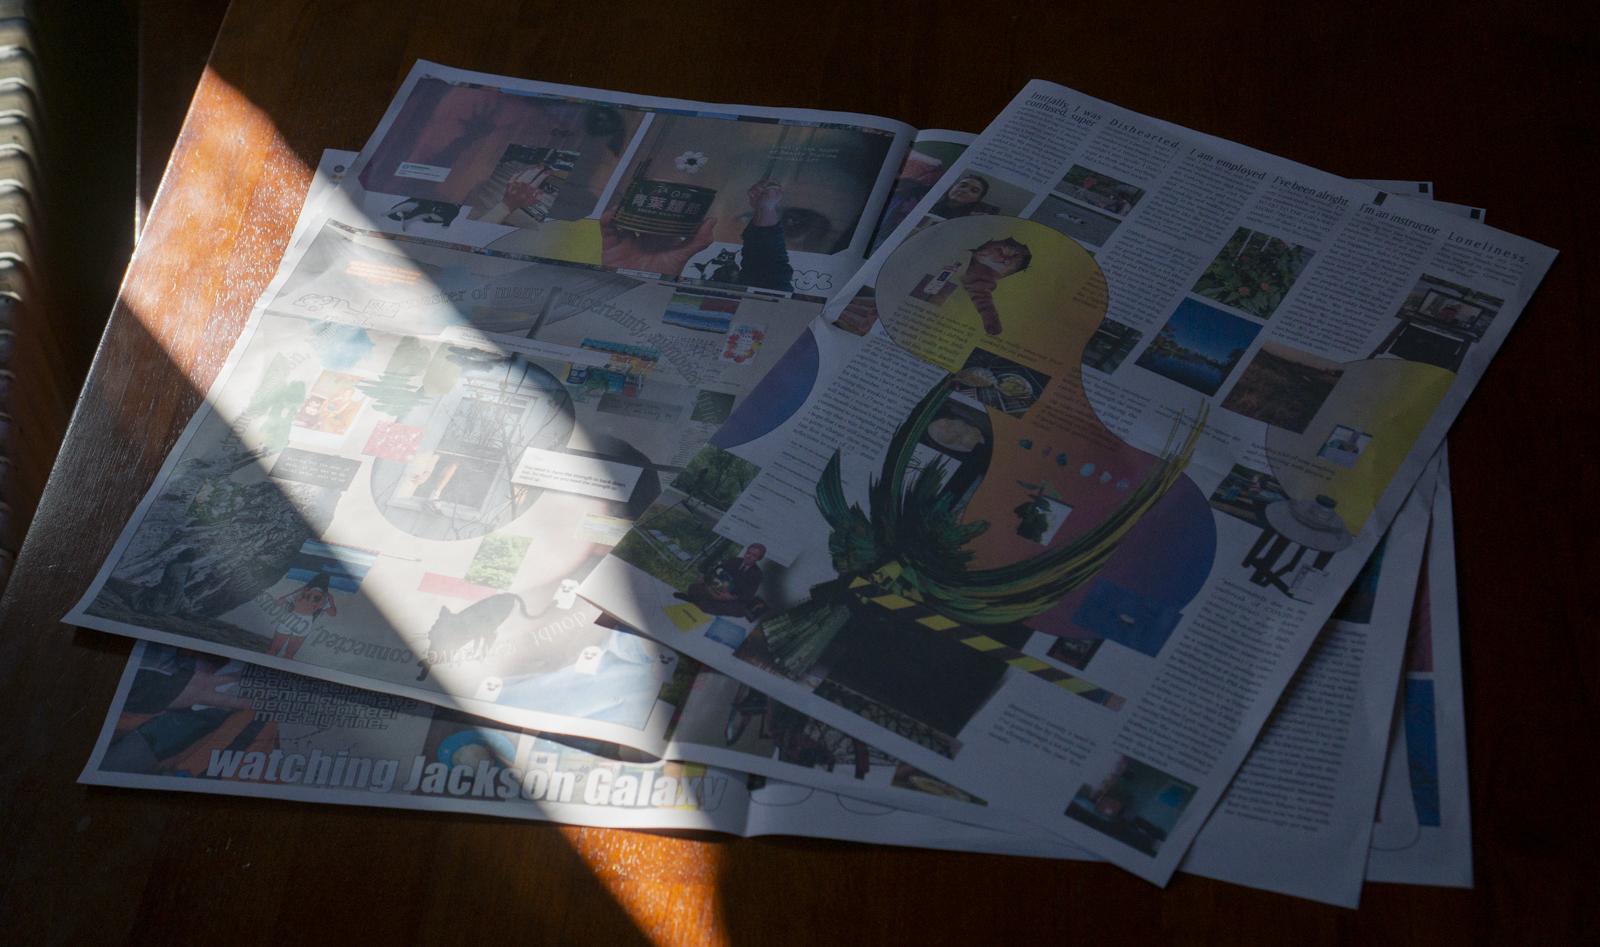 An image of An Ordinary Anthology spread out on a table with sunlight cast over it.